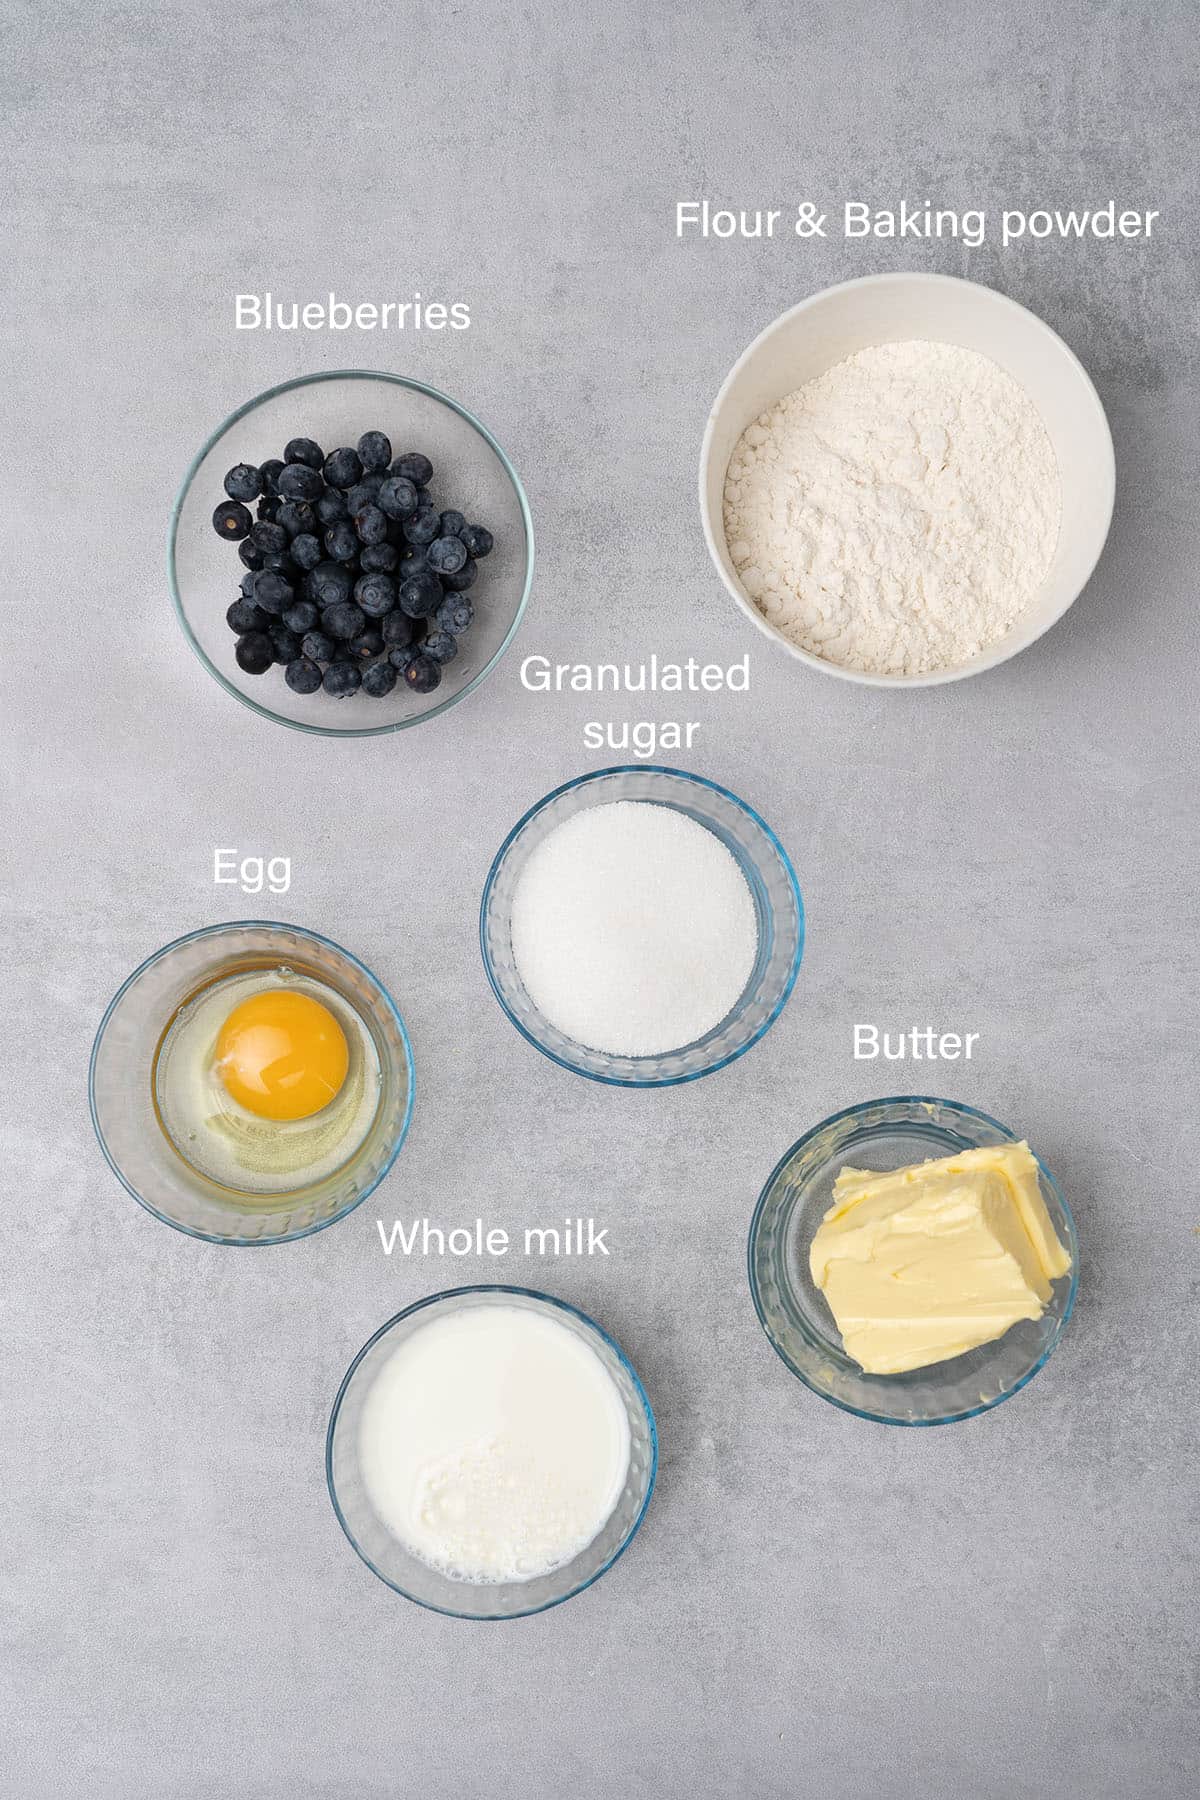 Mini blueberry muffin ingredients.